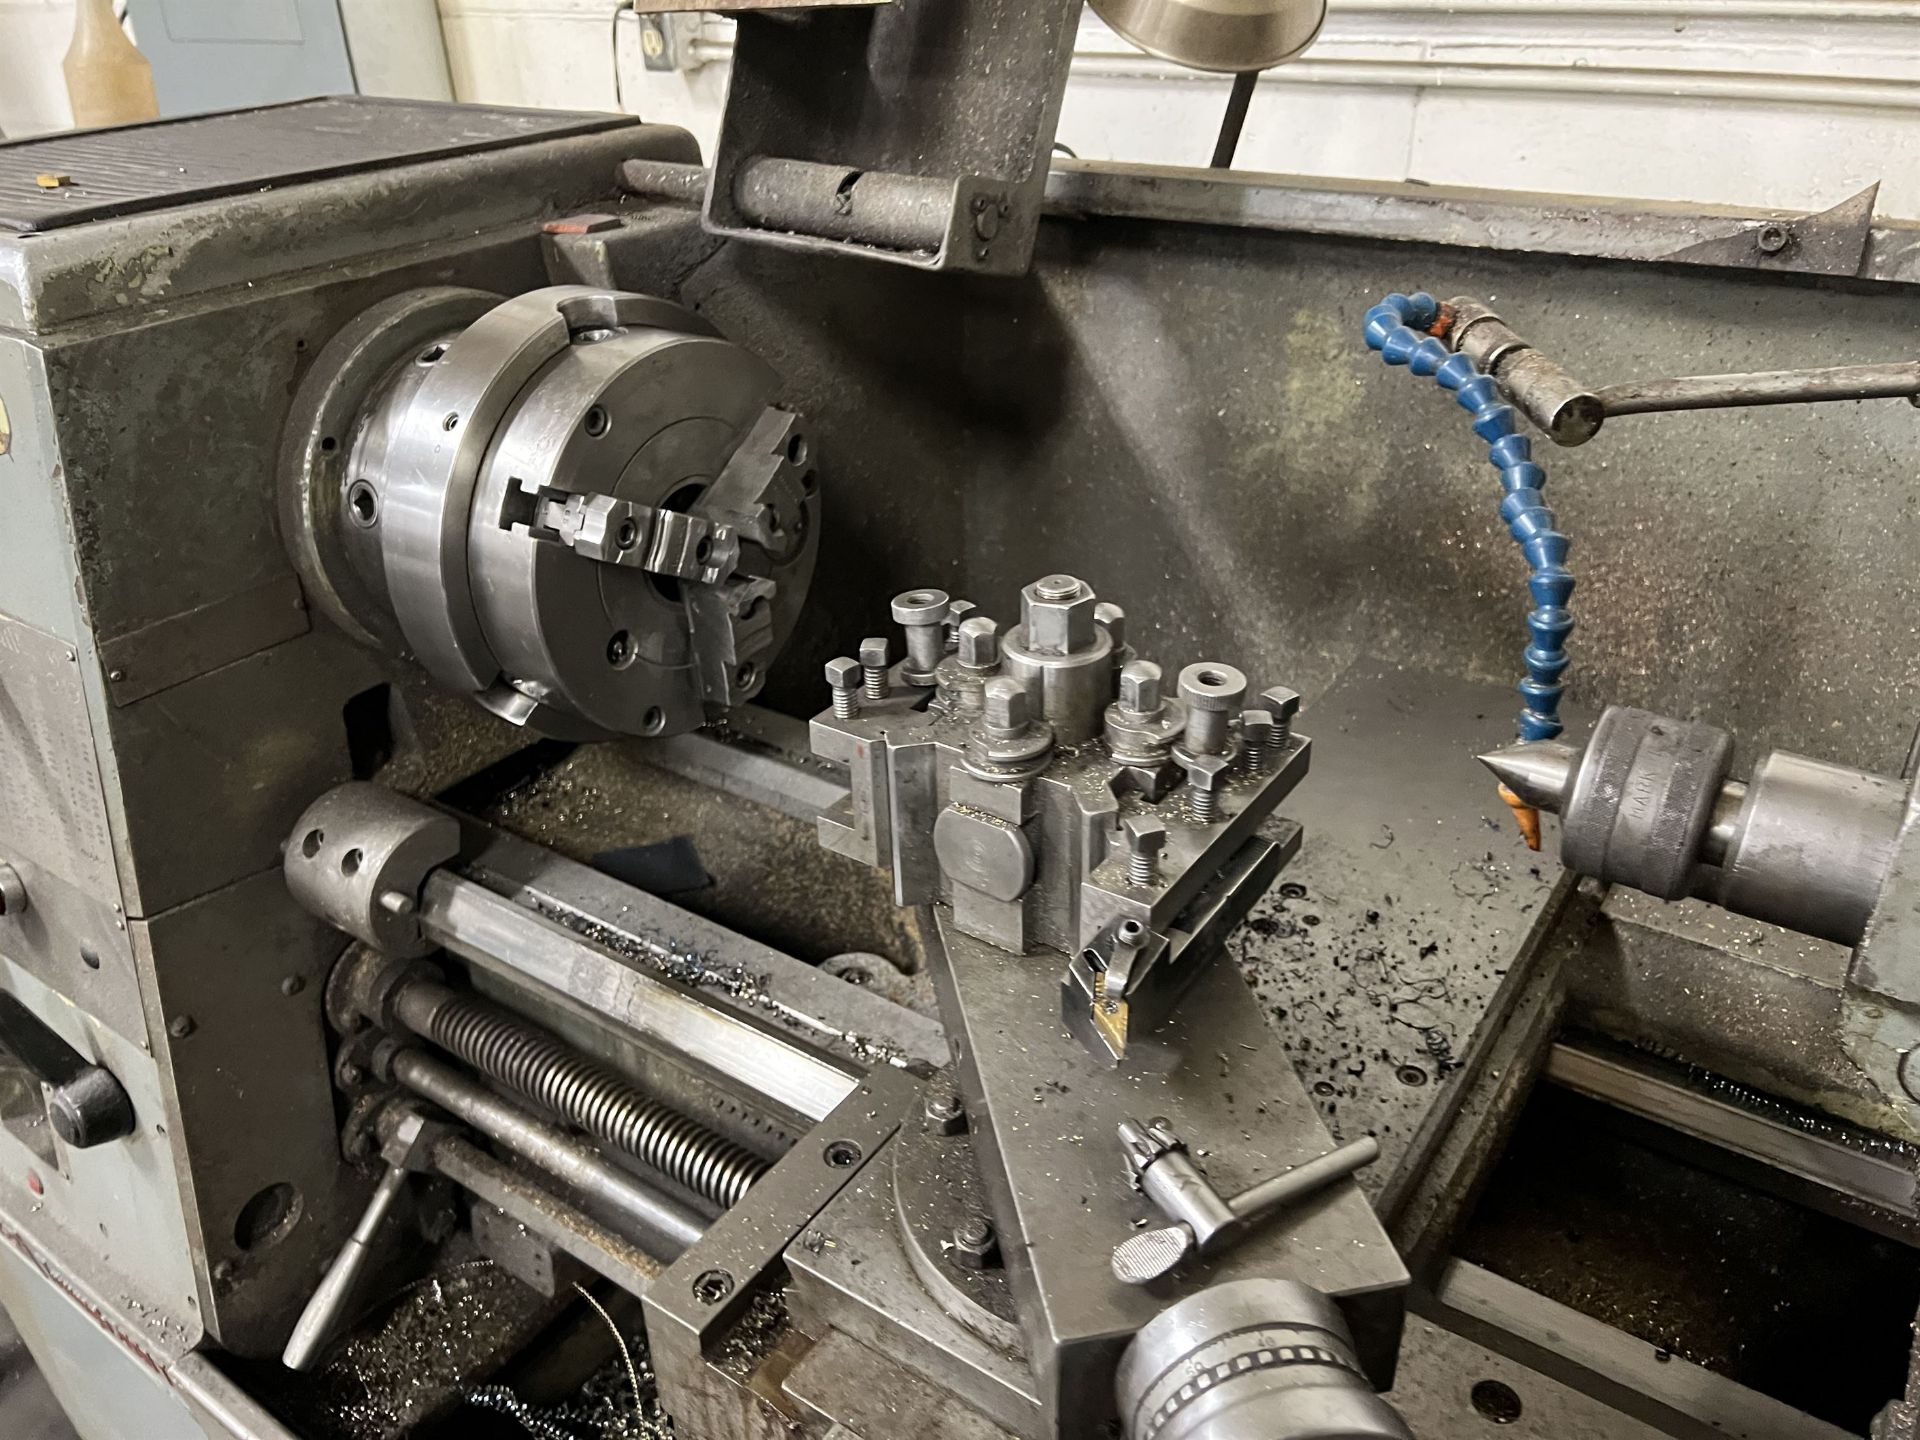 CLAUSING COLCHESTER TRIUMPH 2000 TR Lathe, s/n na, 25-2000 RPM, 8" 3-Jaw Chuck, Tool Post, Tailstock - Image 5 of 8